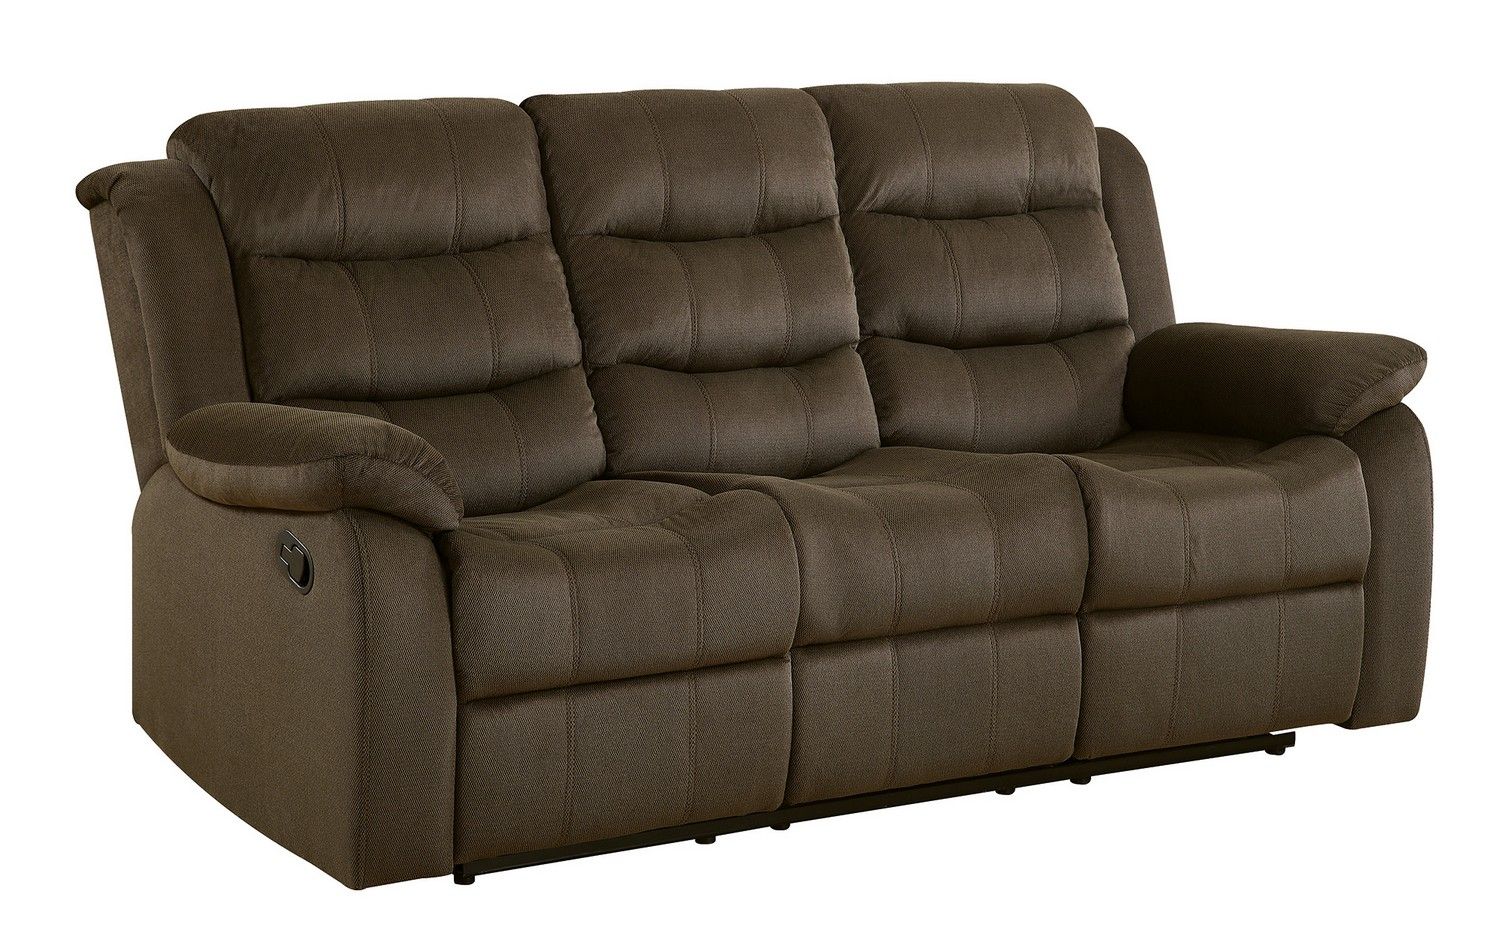 Coaster Rodman Reclining Sofa – Two Tone Chocolate 601881 At Homelement In 2 Tone Chocolate Microfiber Sofas (View 7 of 20)